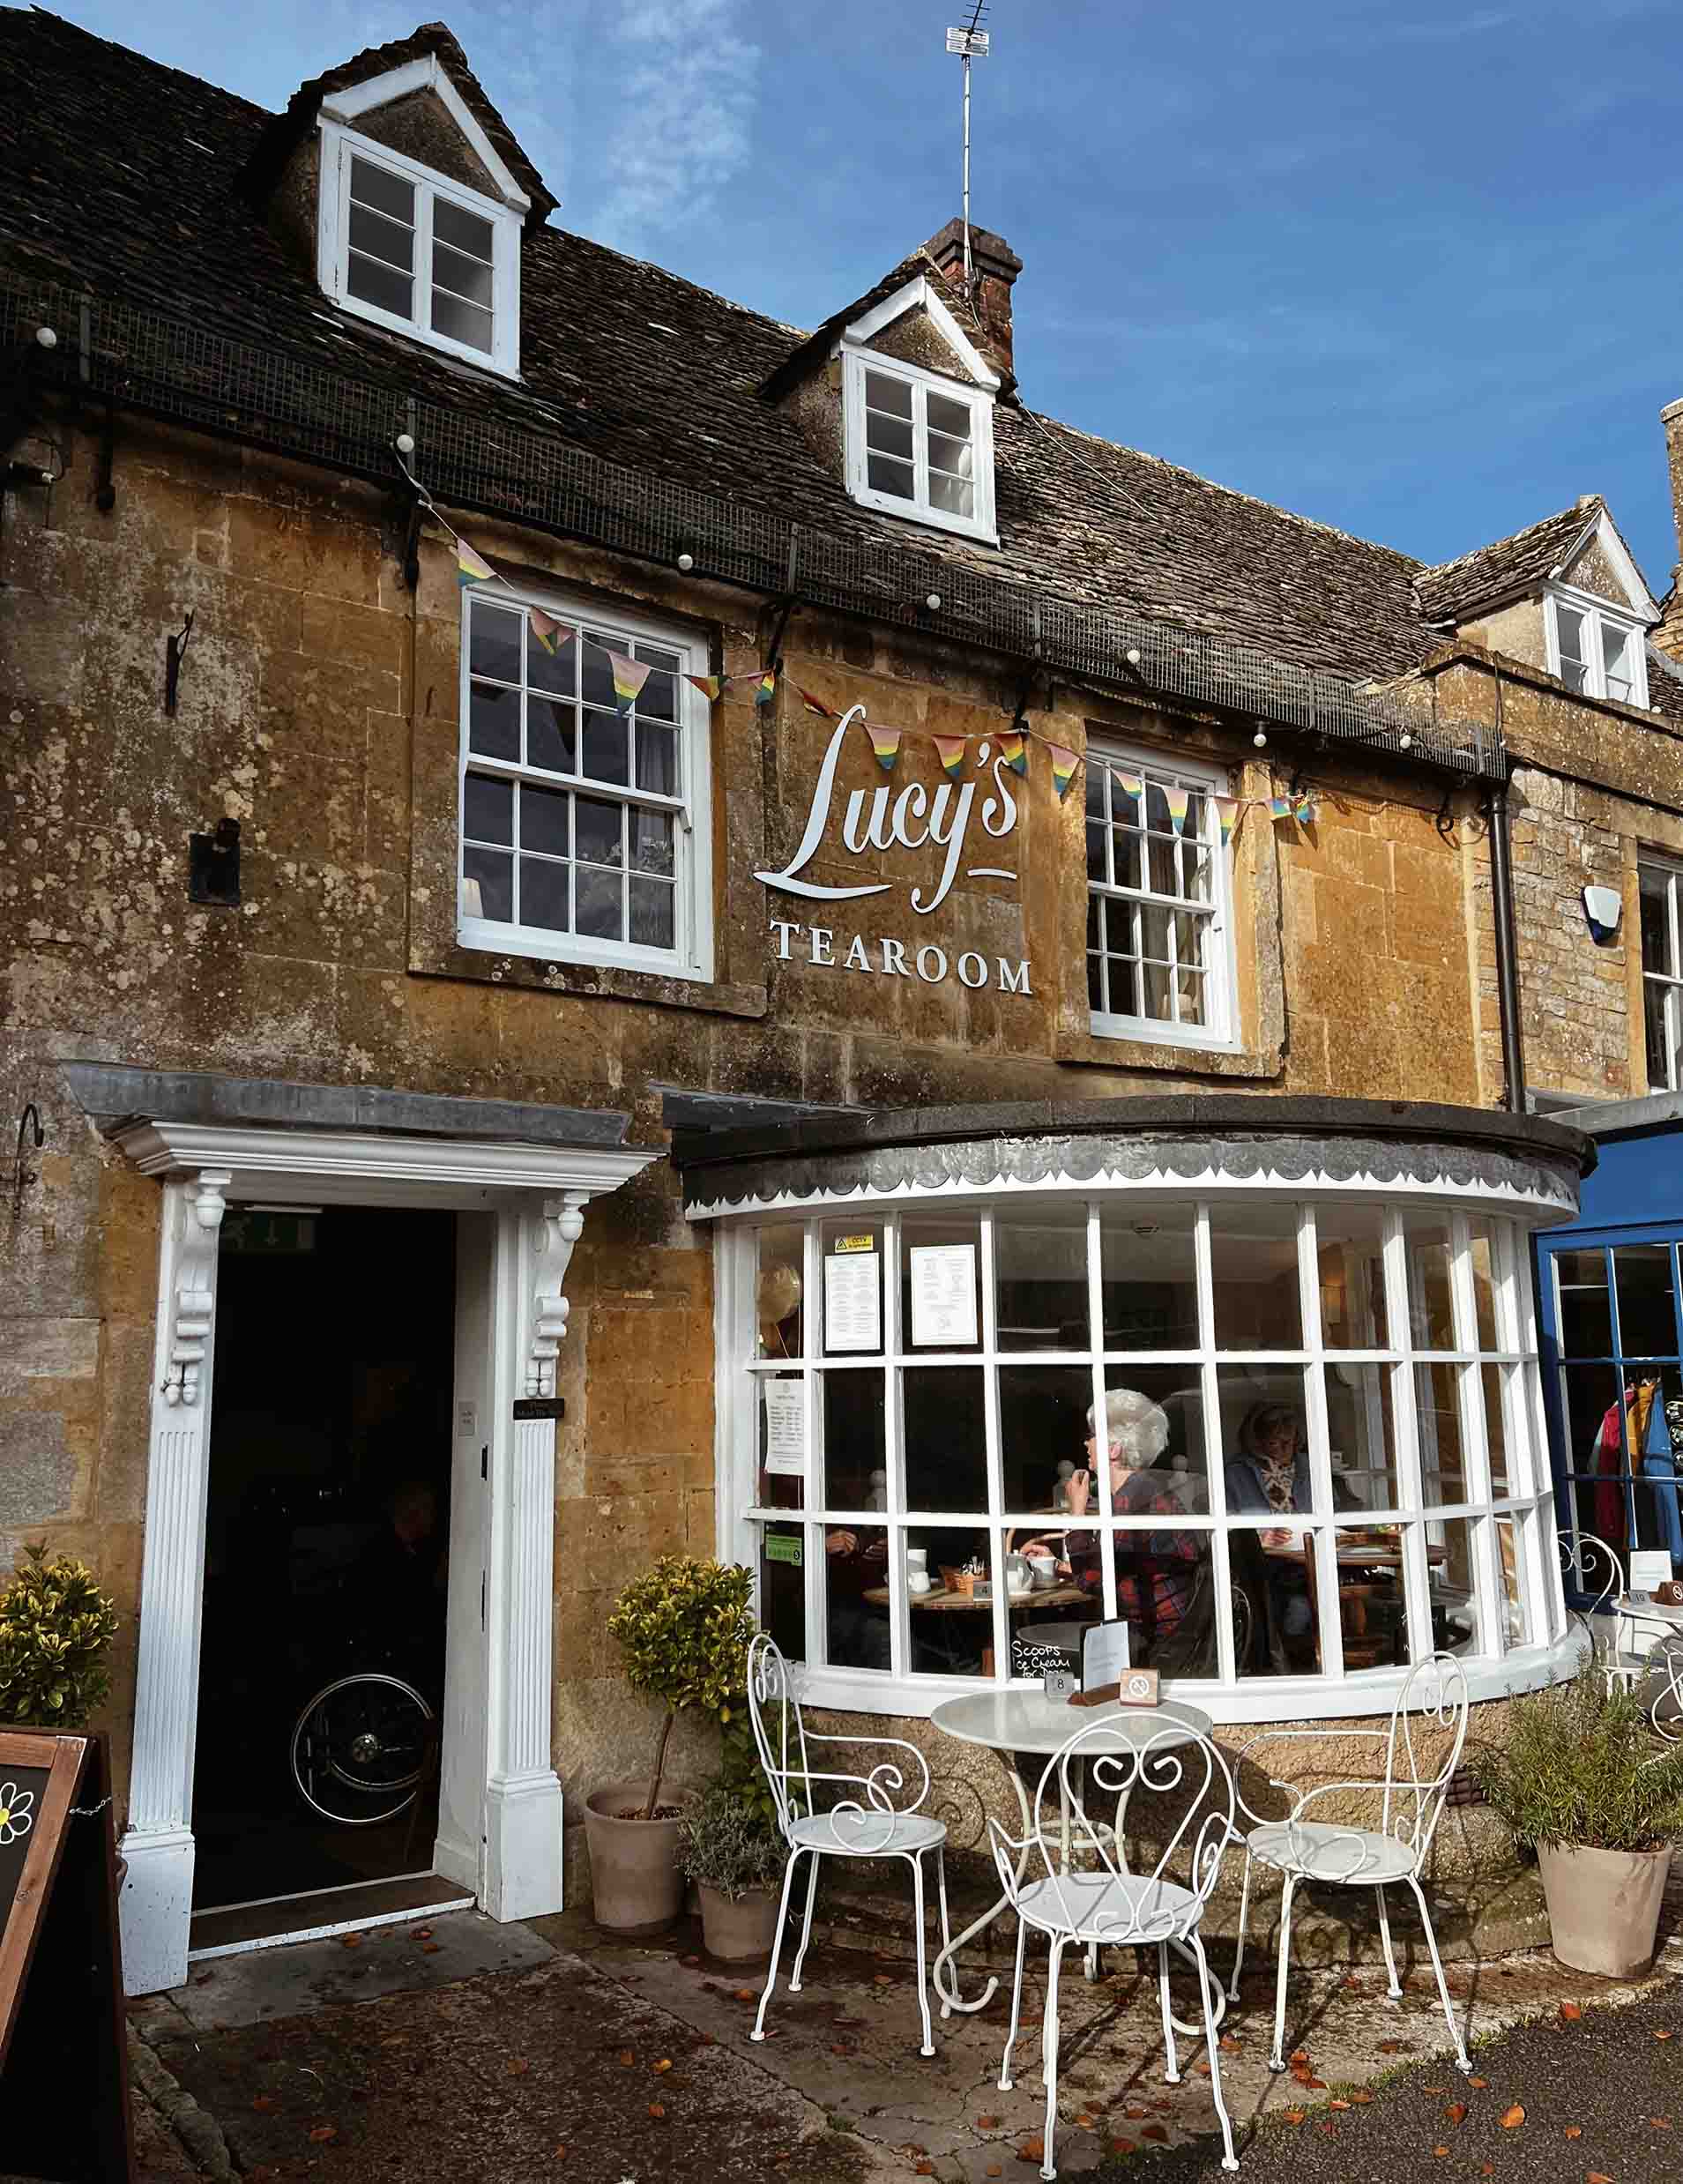 Lucy's Tearoom in Stow-on-the-Wold